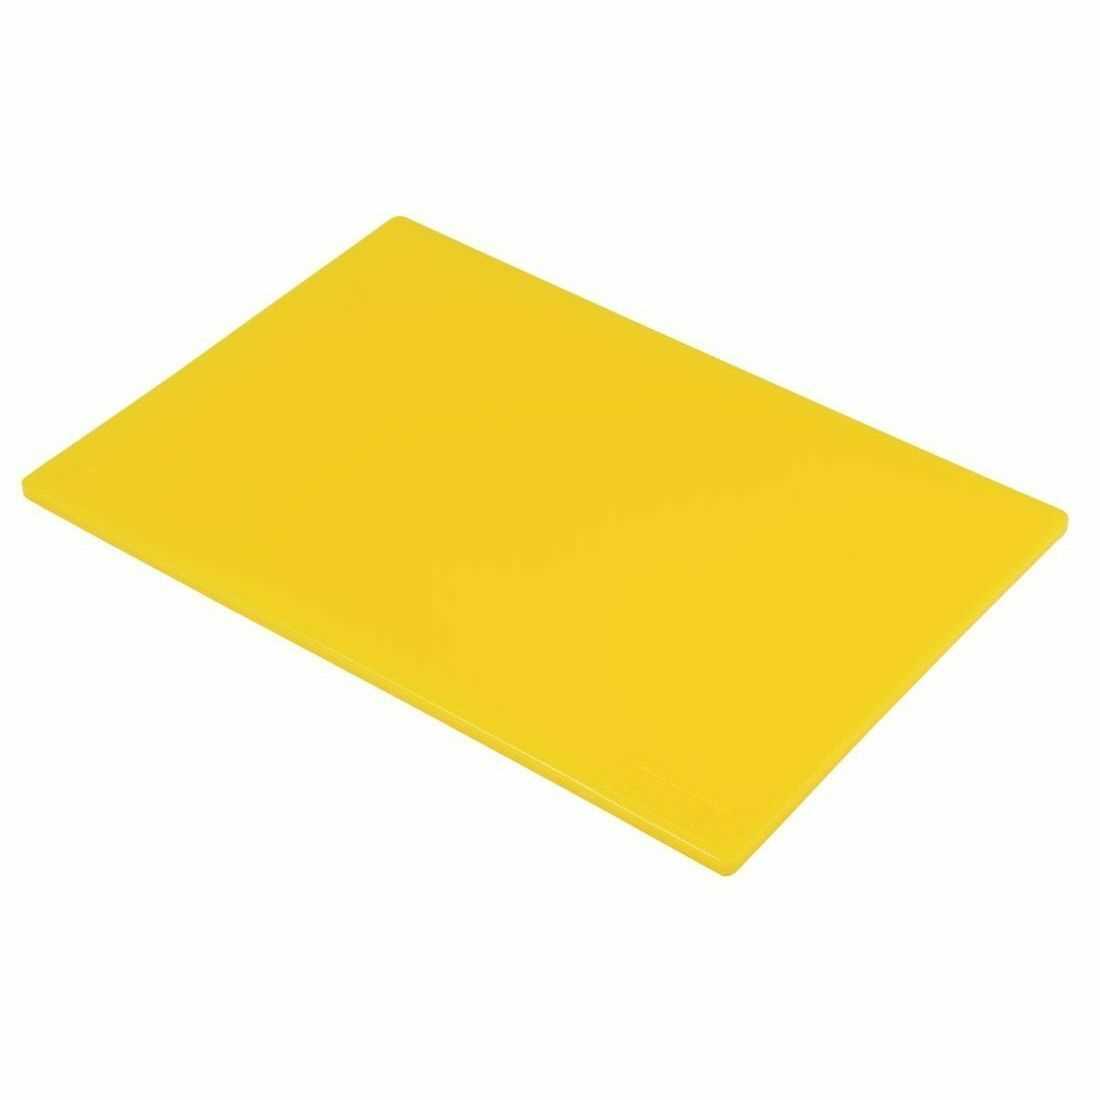 Yellow Commercial Kitchen Chopping Board Colour Coded Hygiene Catering Food Cutting Set